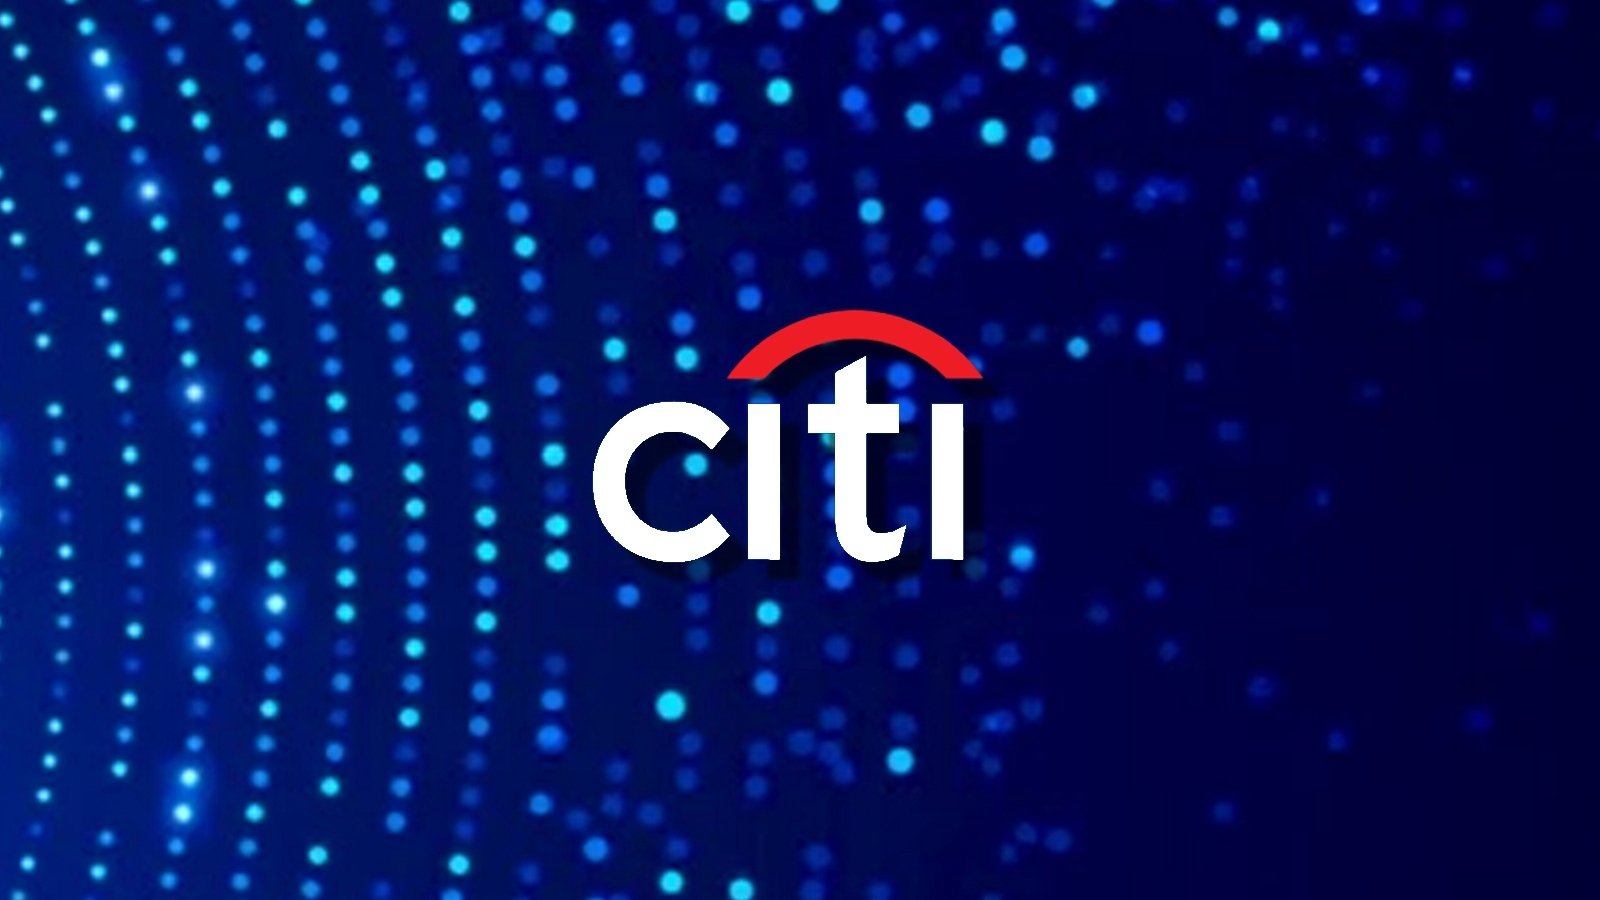 Citibank sued over failure to defend customers against hacks, fraud